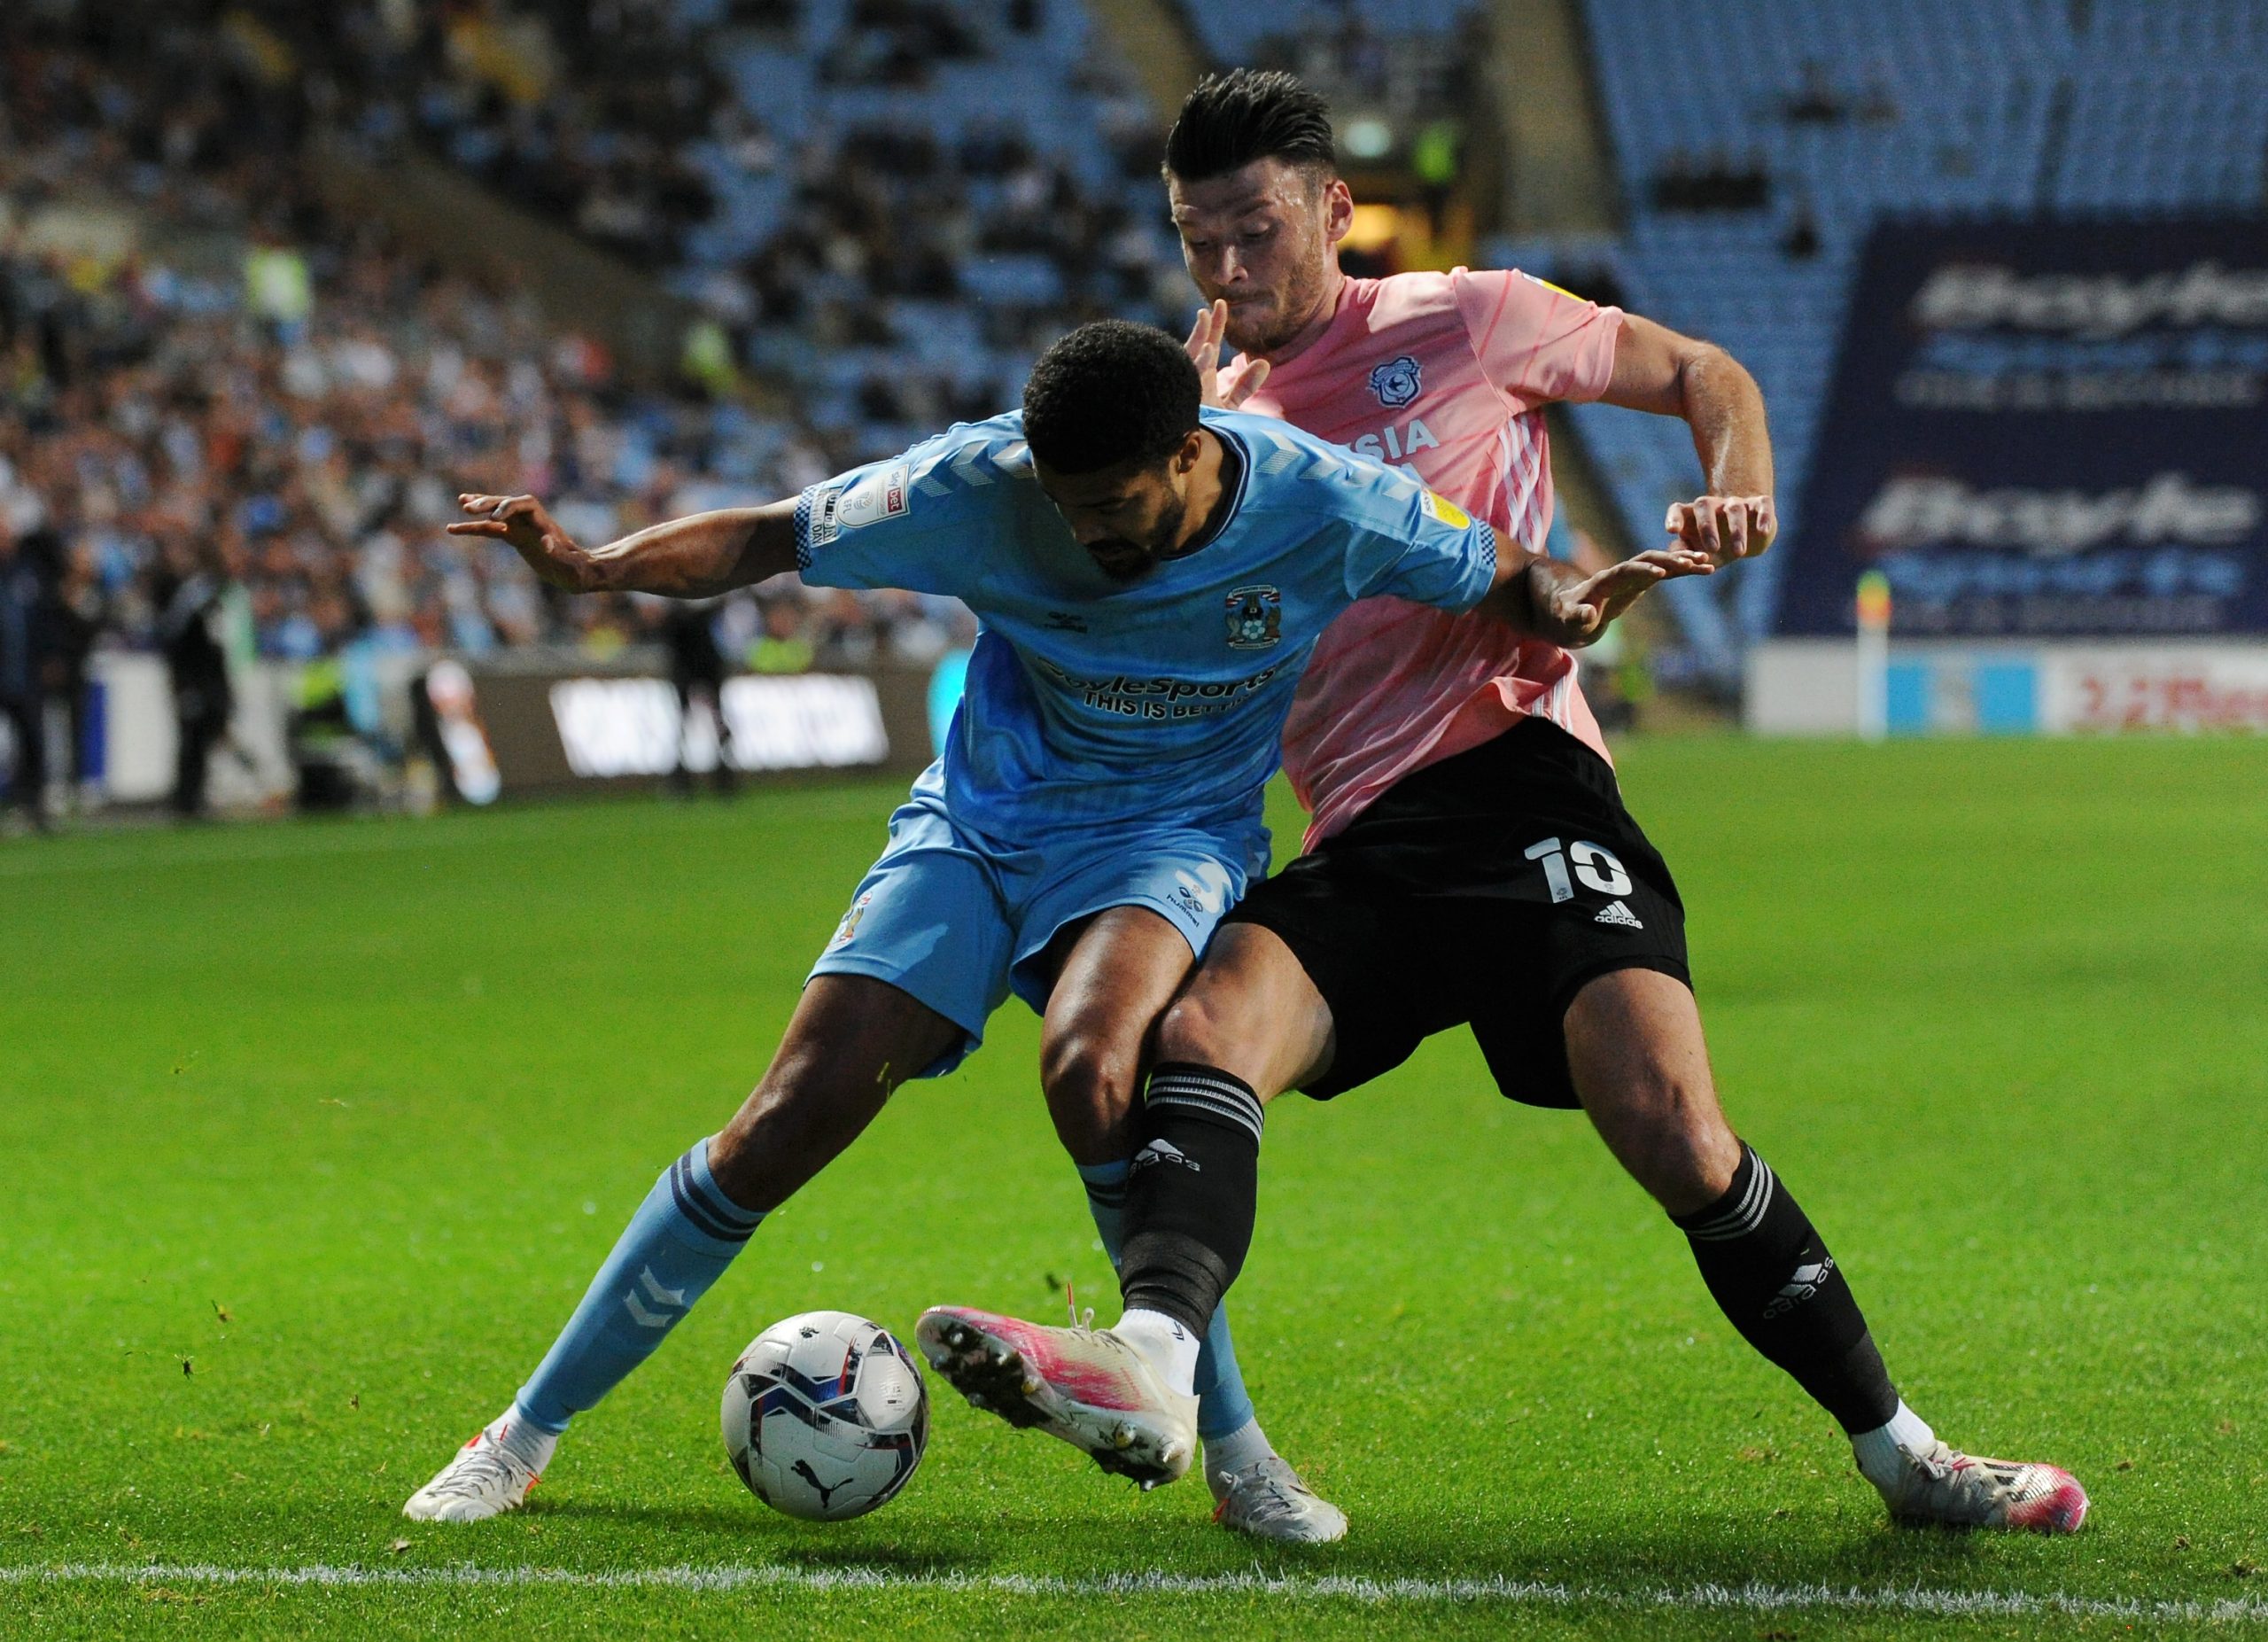 Chelsea defender Jake Clarke-Salter opens up about his future amidst Coventry City loan.